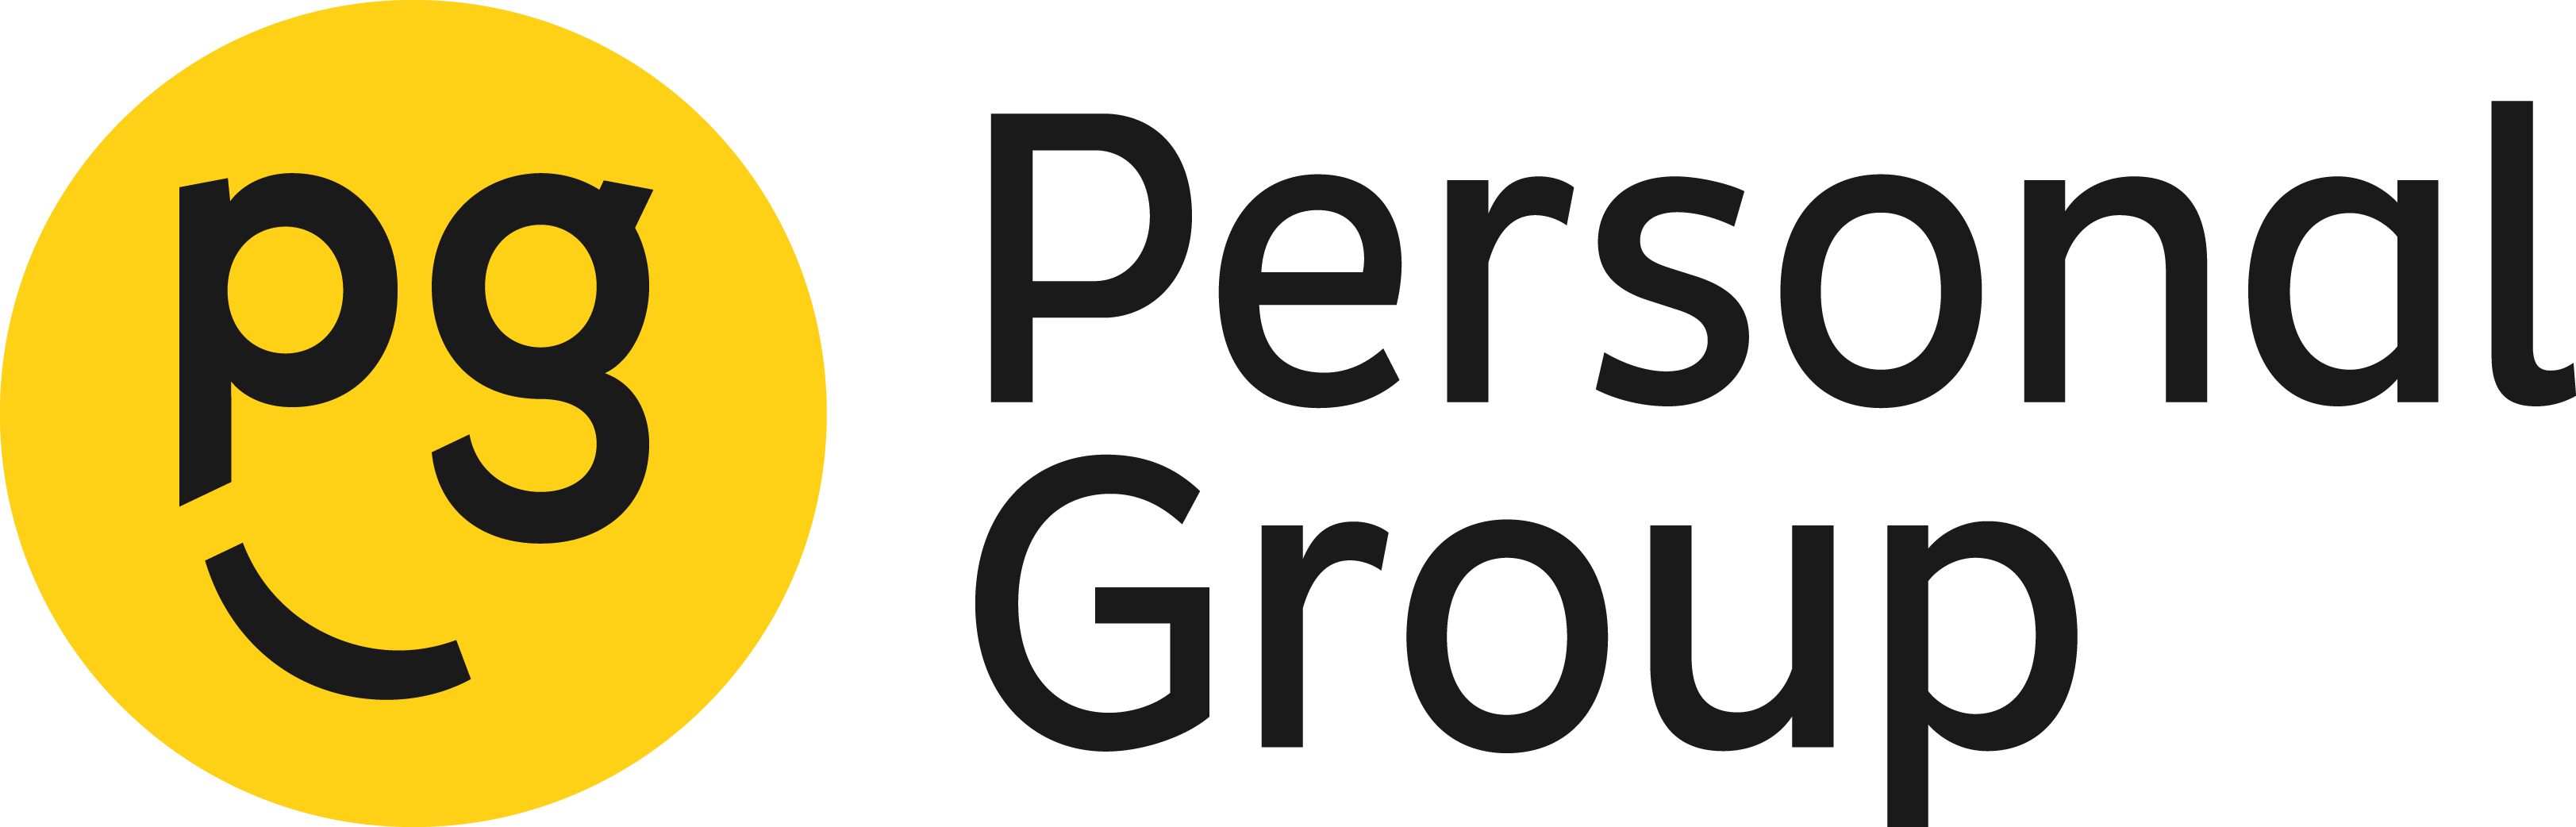 Personal group logo